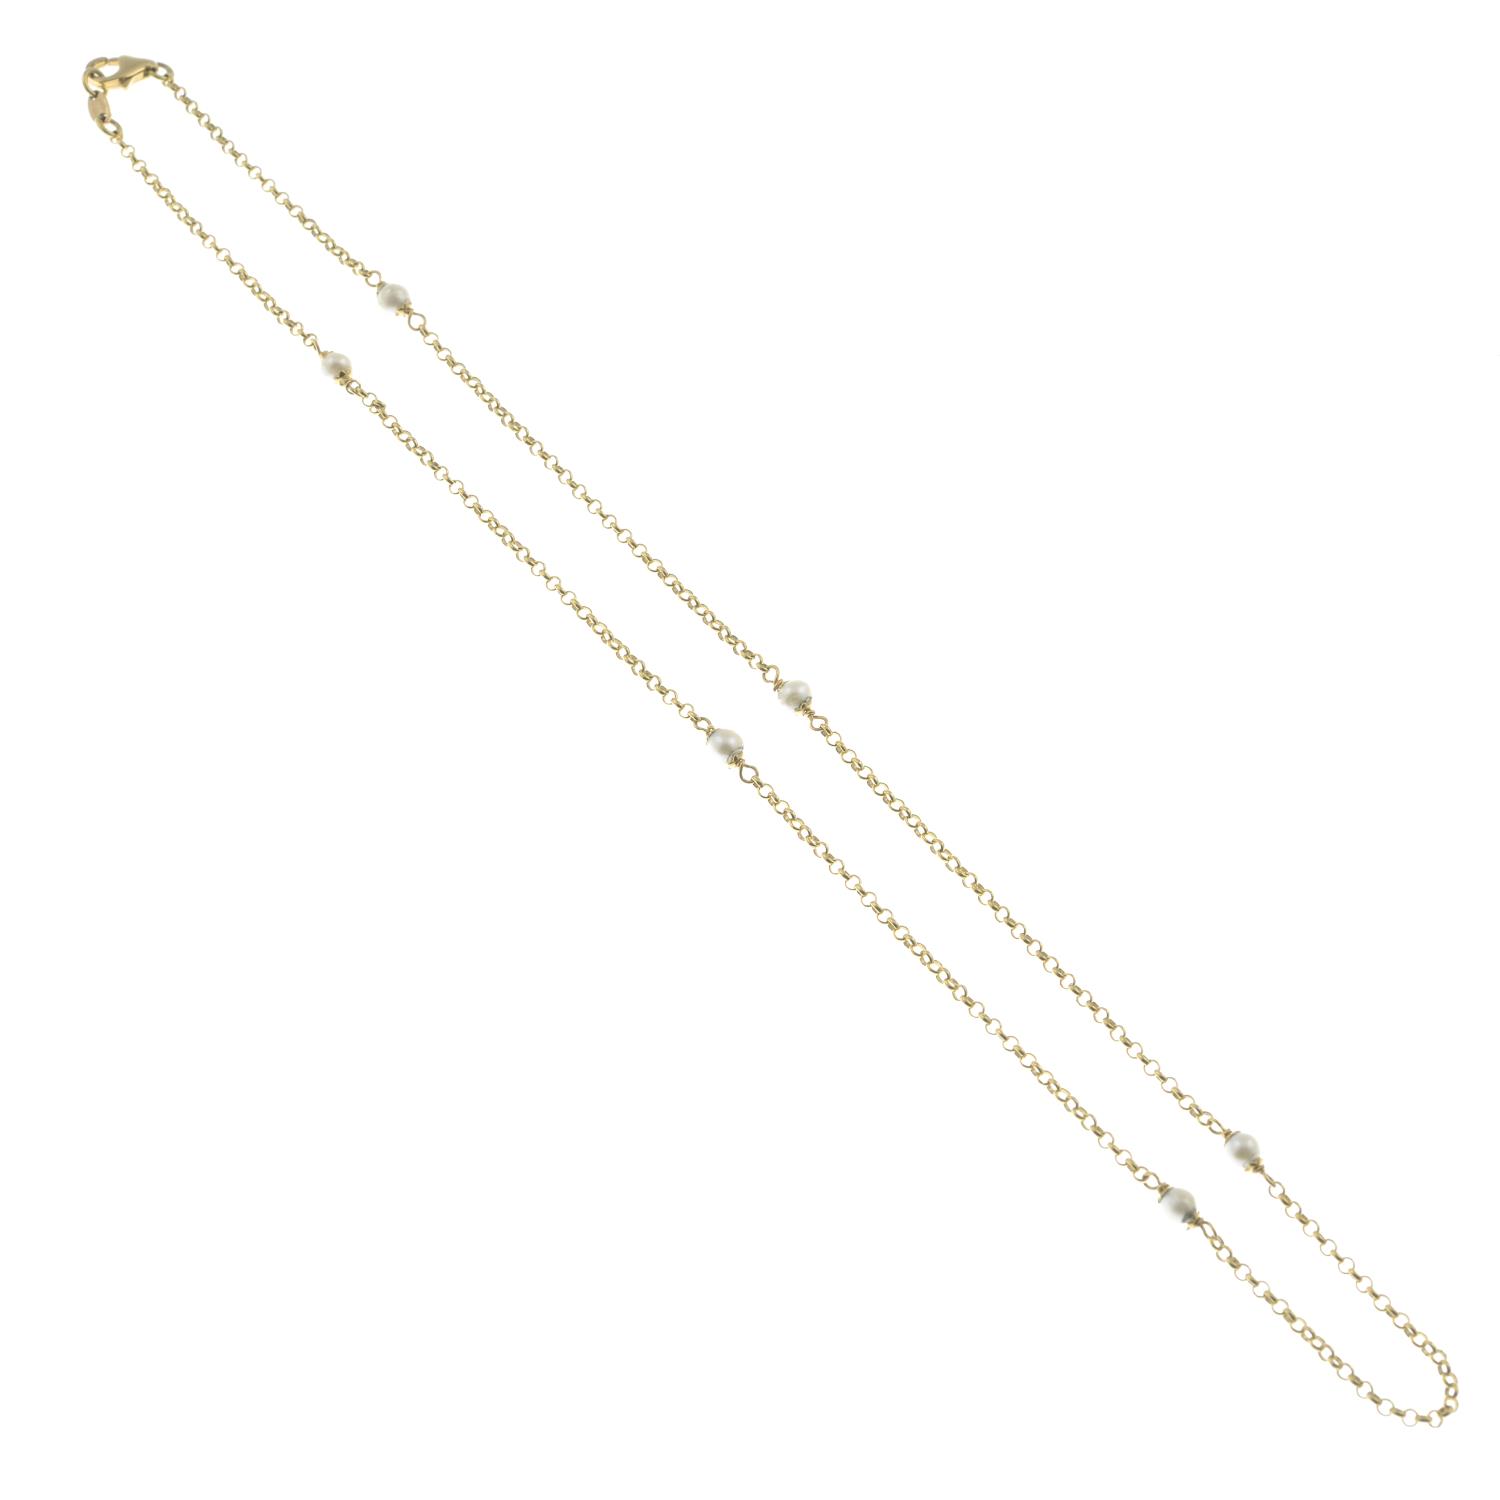 An 18ct gold necklace, with seed pearl spacers.Hallmarks for 18ct gold. - Image 2 of 2